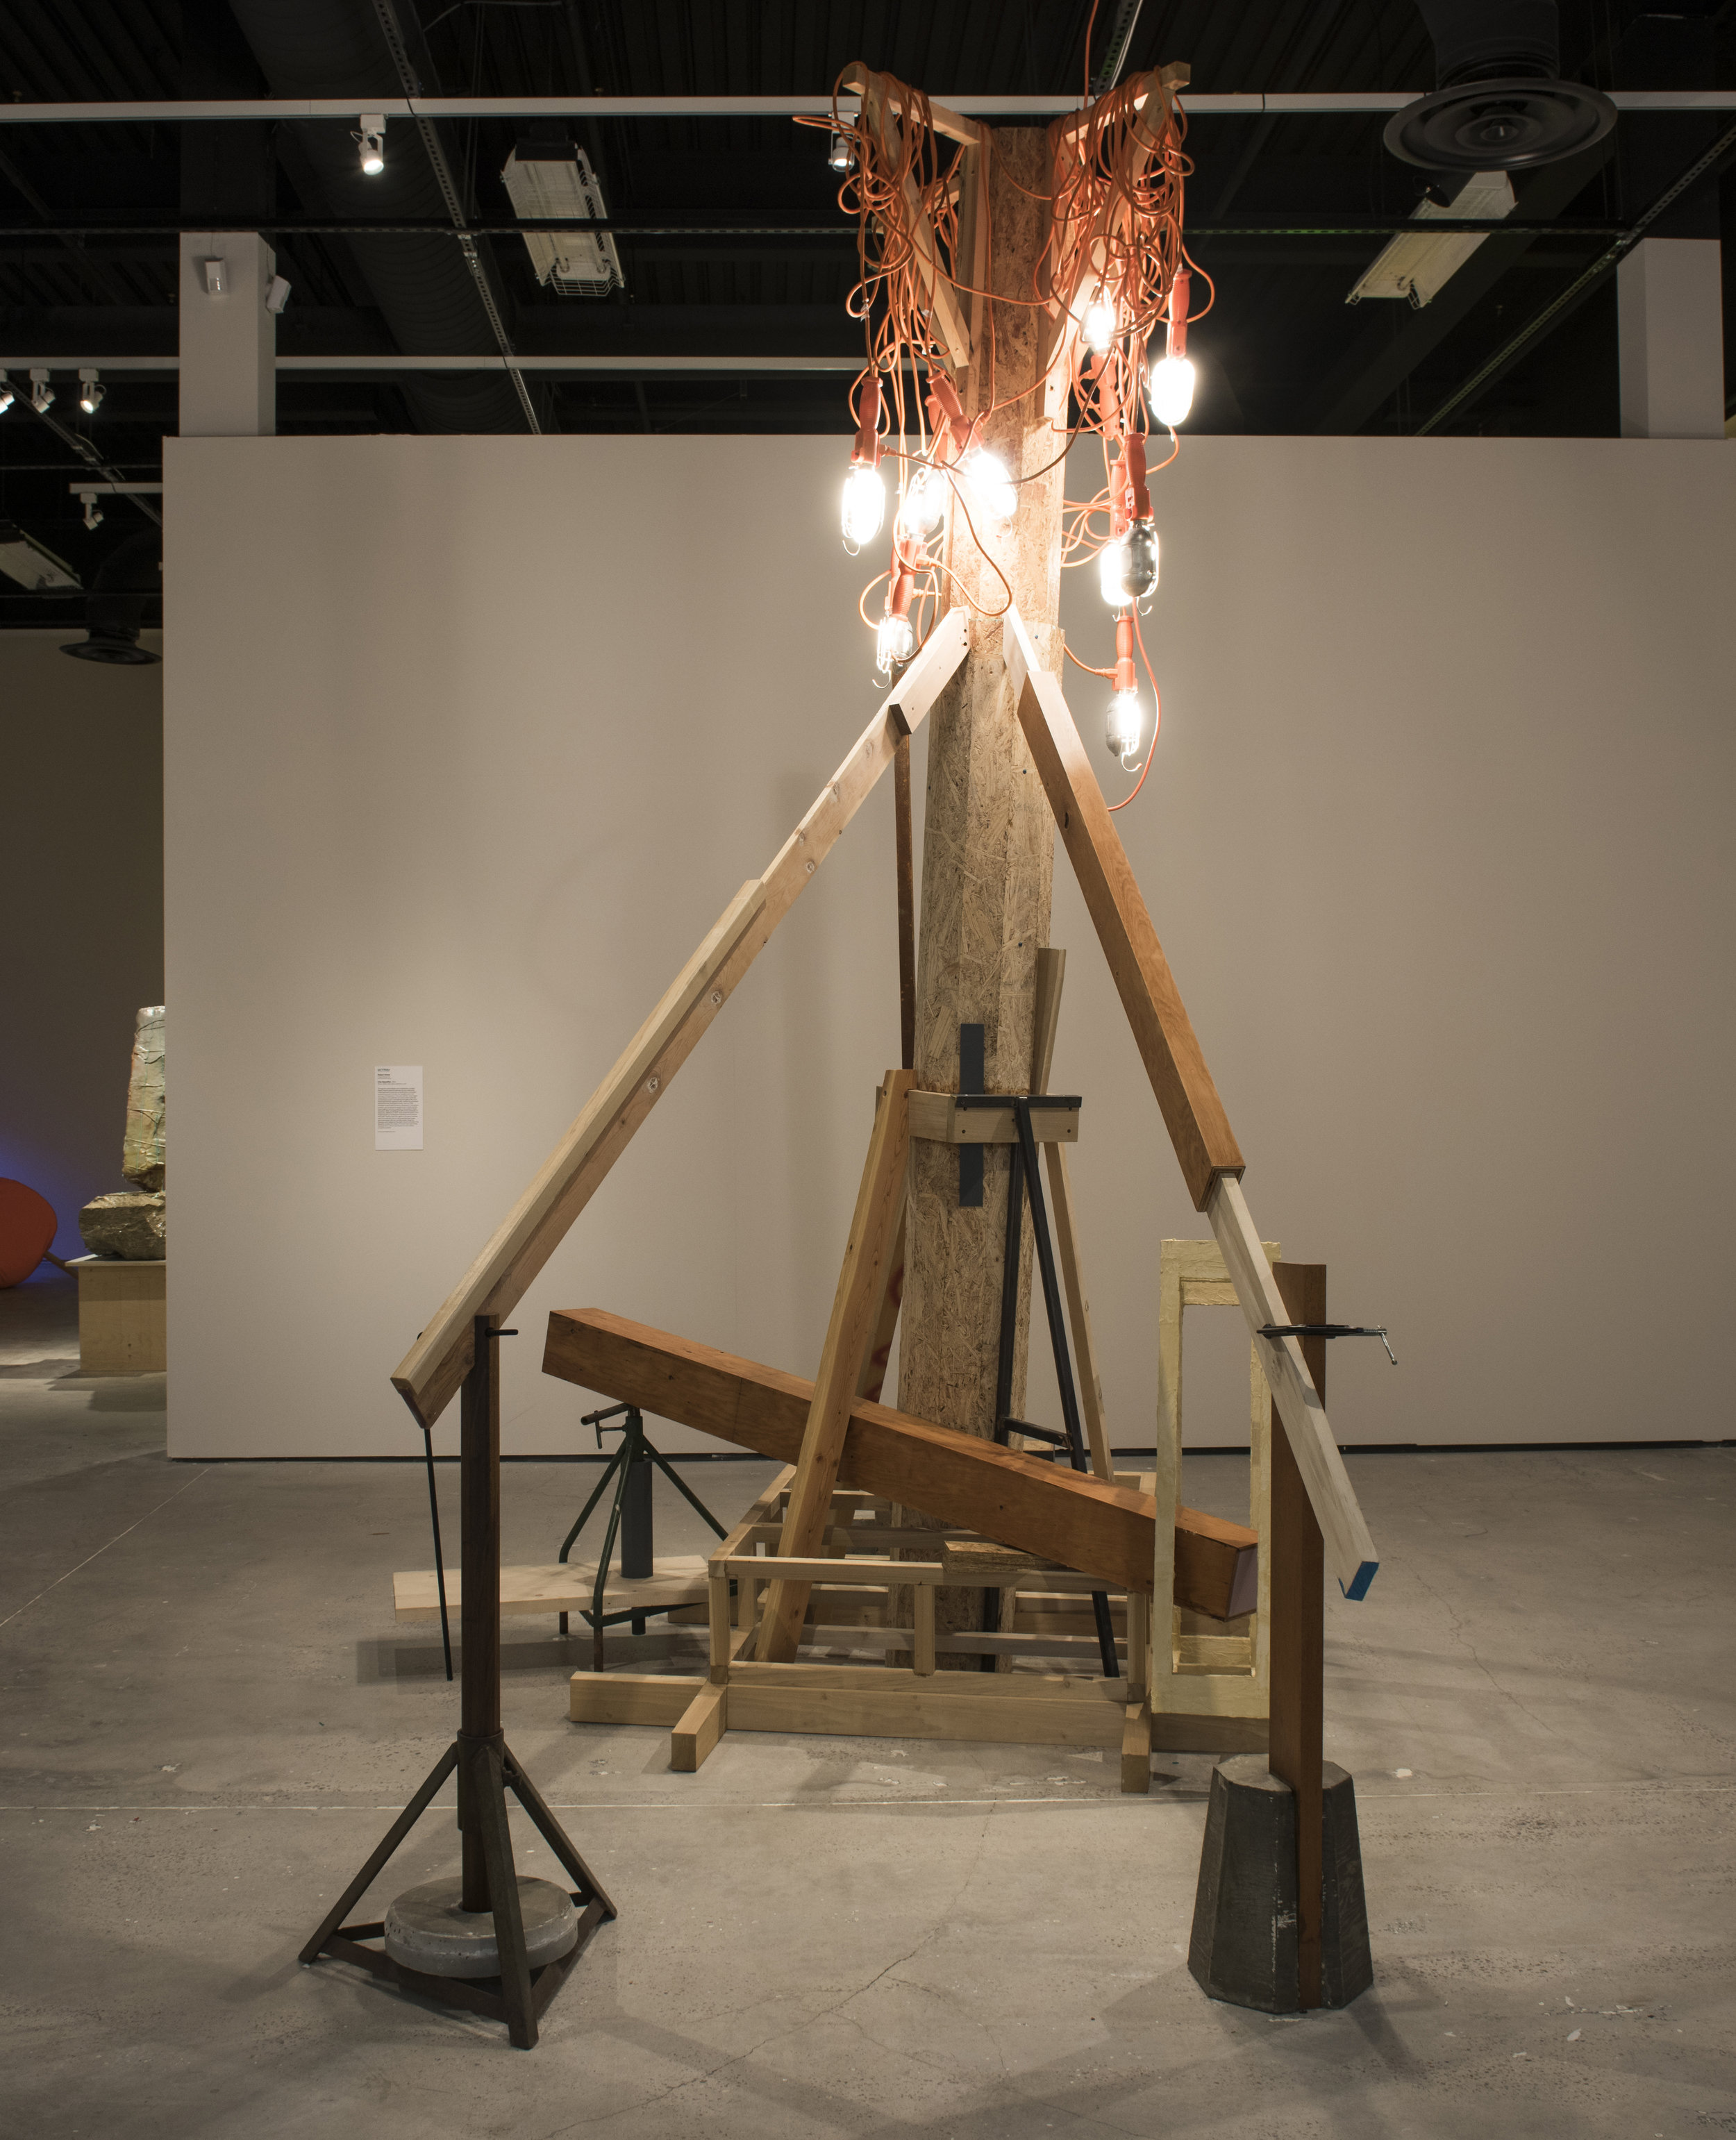   City Beautiful &nbsp; 2017 &nbsp;OSB, Concrete, Various Woods, Steel,  Work Lights, Plaster, C clamp. Dimensions Variable  Exhibition view at Ringling Museum of Art, Sarasota FL  http://www.skywaytampabay.com/ 